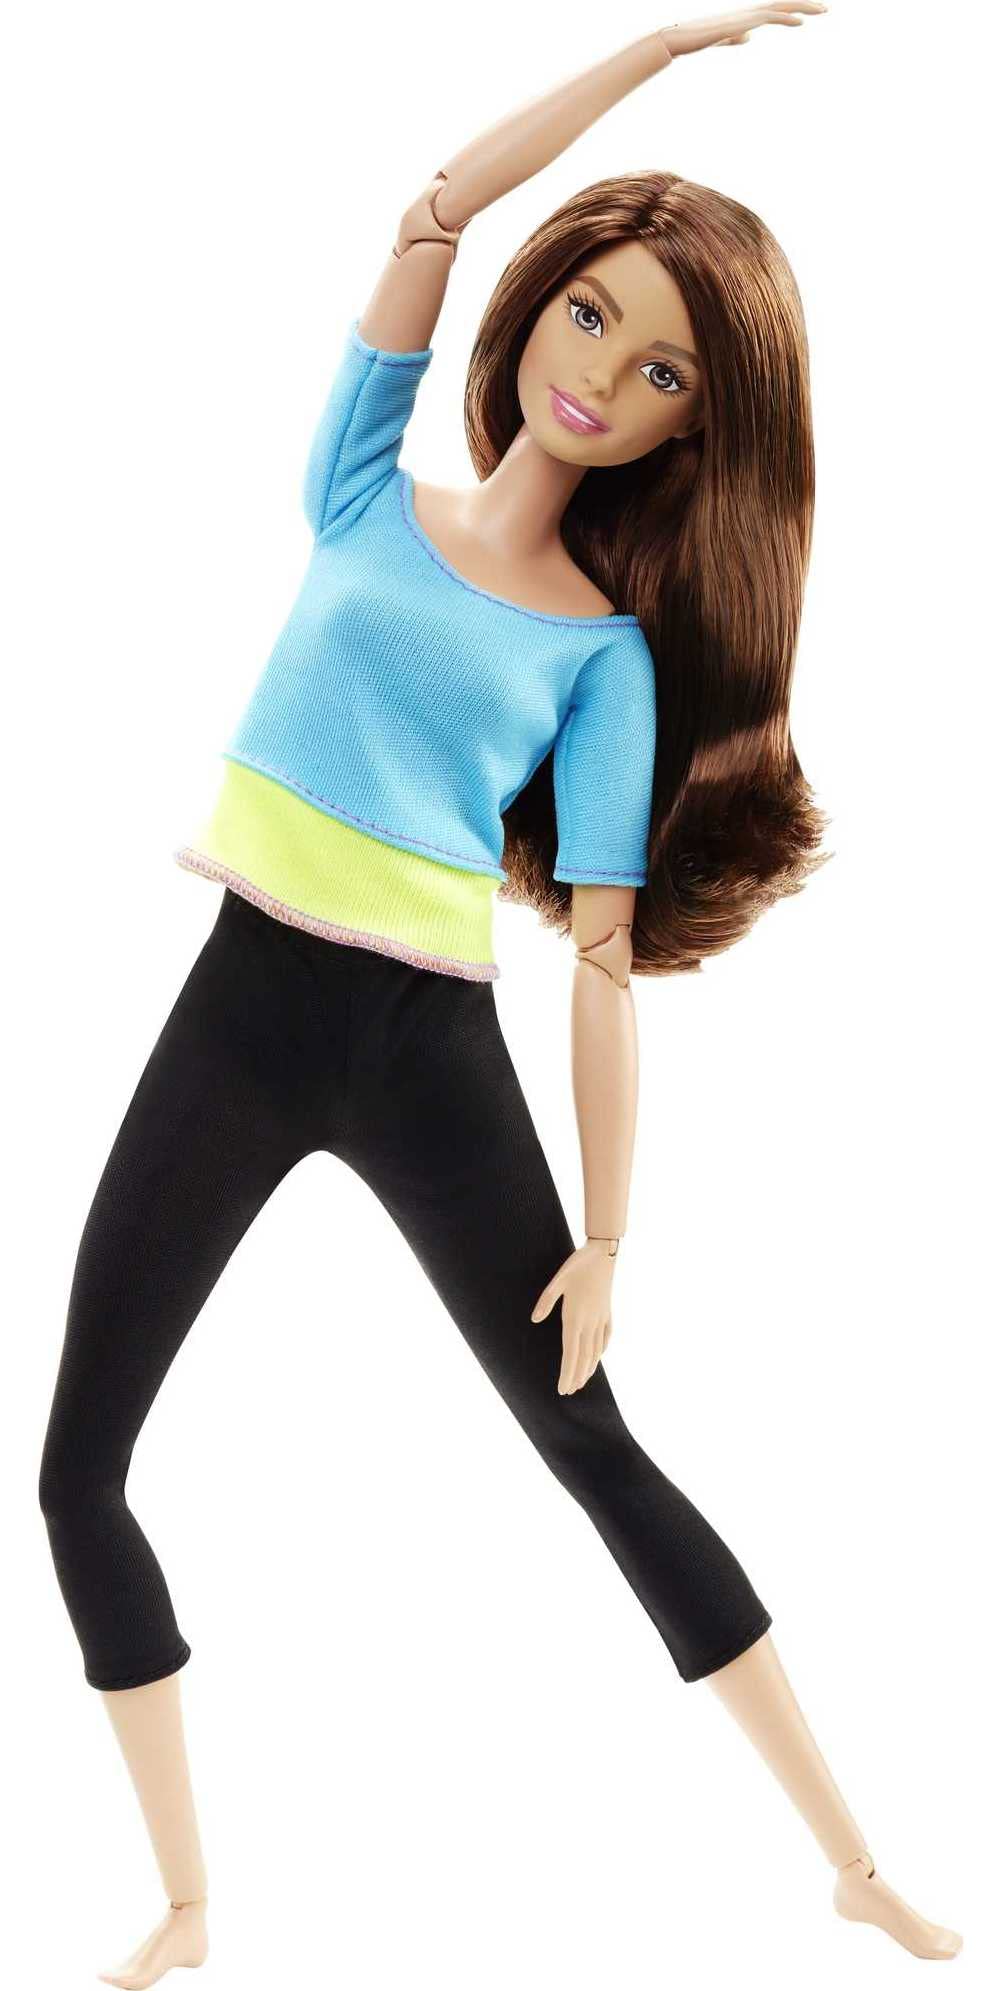 Barbie Made to Move Posable Doll in Blue Color-Blocked Top and Yoga Leggings, Flexible (Amazon Exclusive)